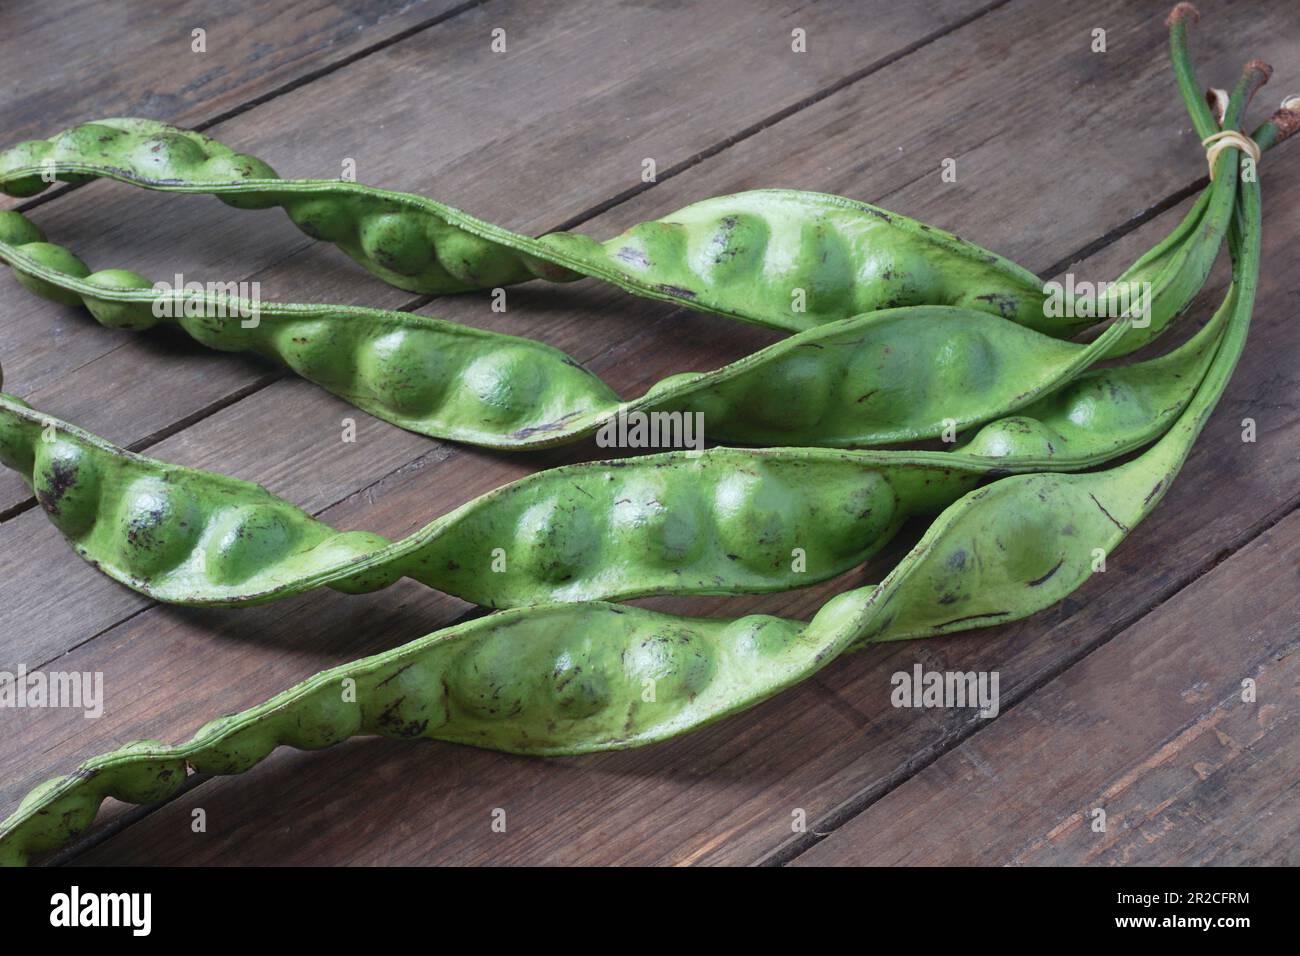 Raw of Petai or Pete, which have a rather peculiar smell. Usually eaten raw or cooked, popular with the name stink bean or bitter bean. Stock Photo